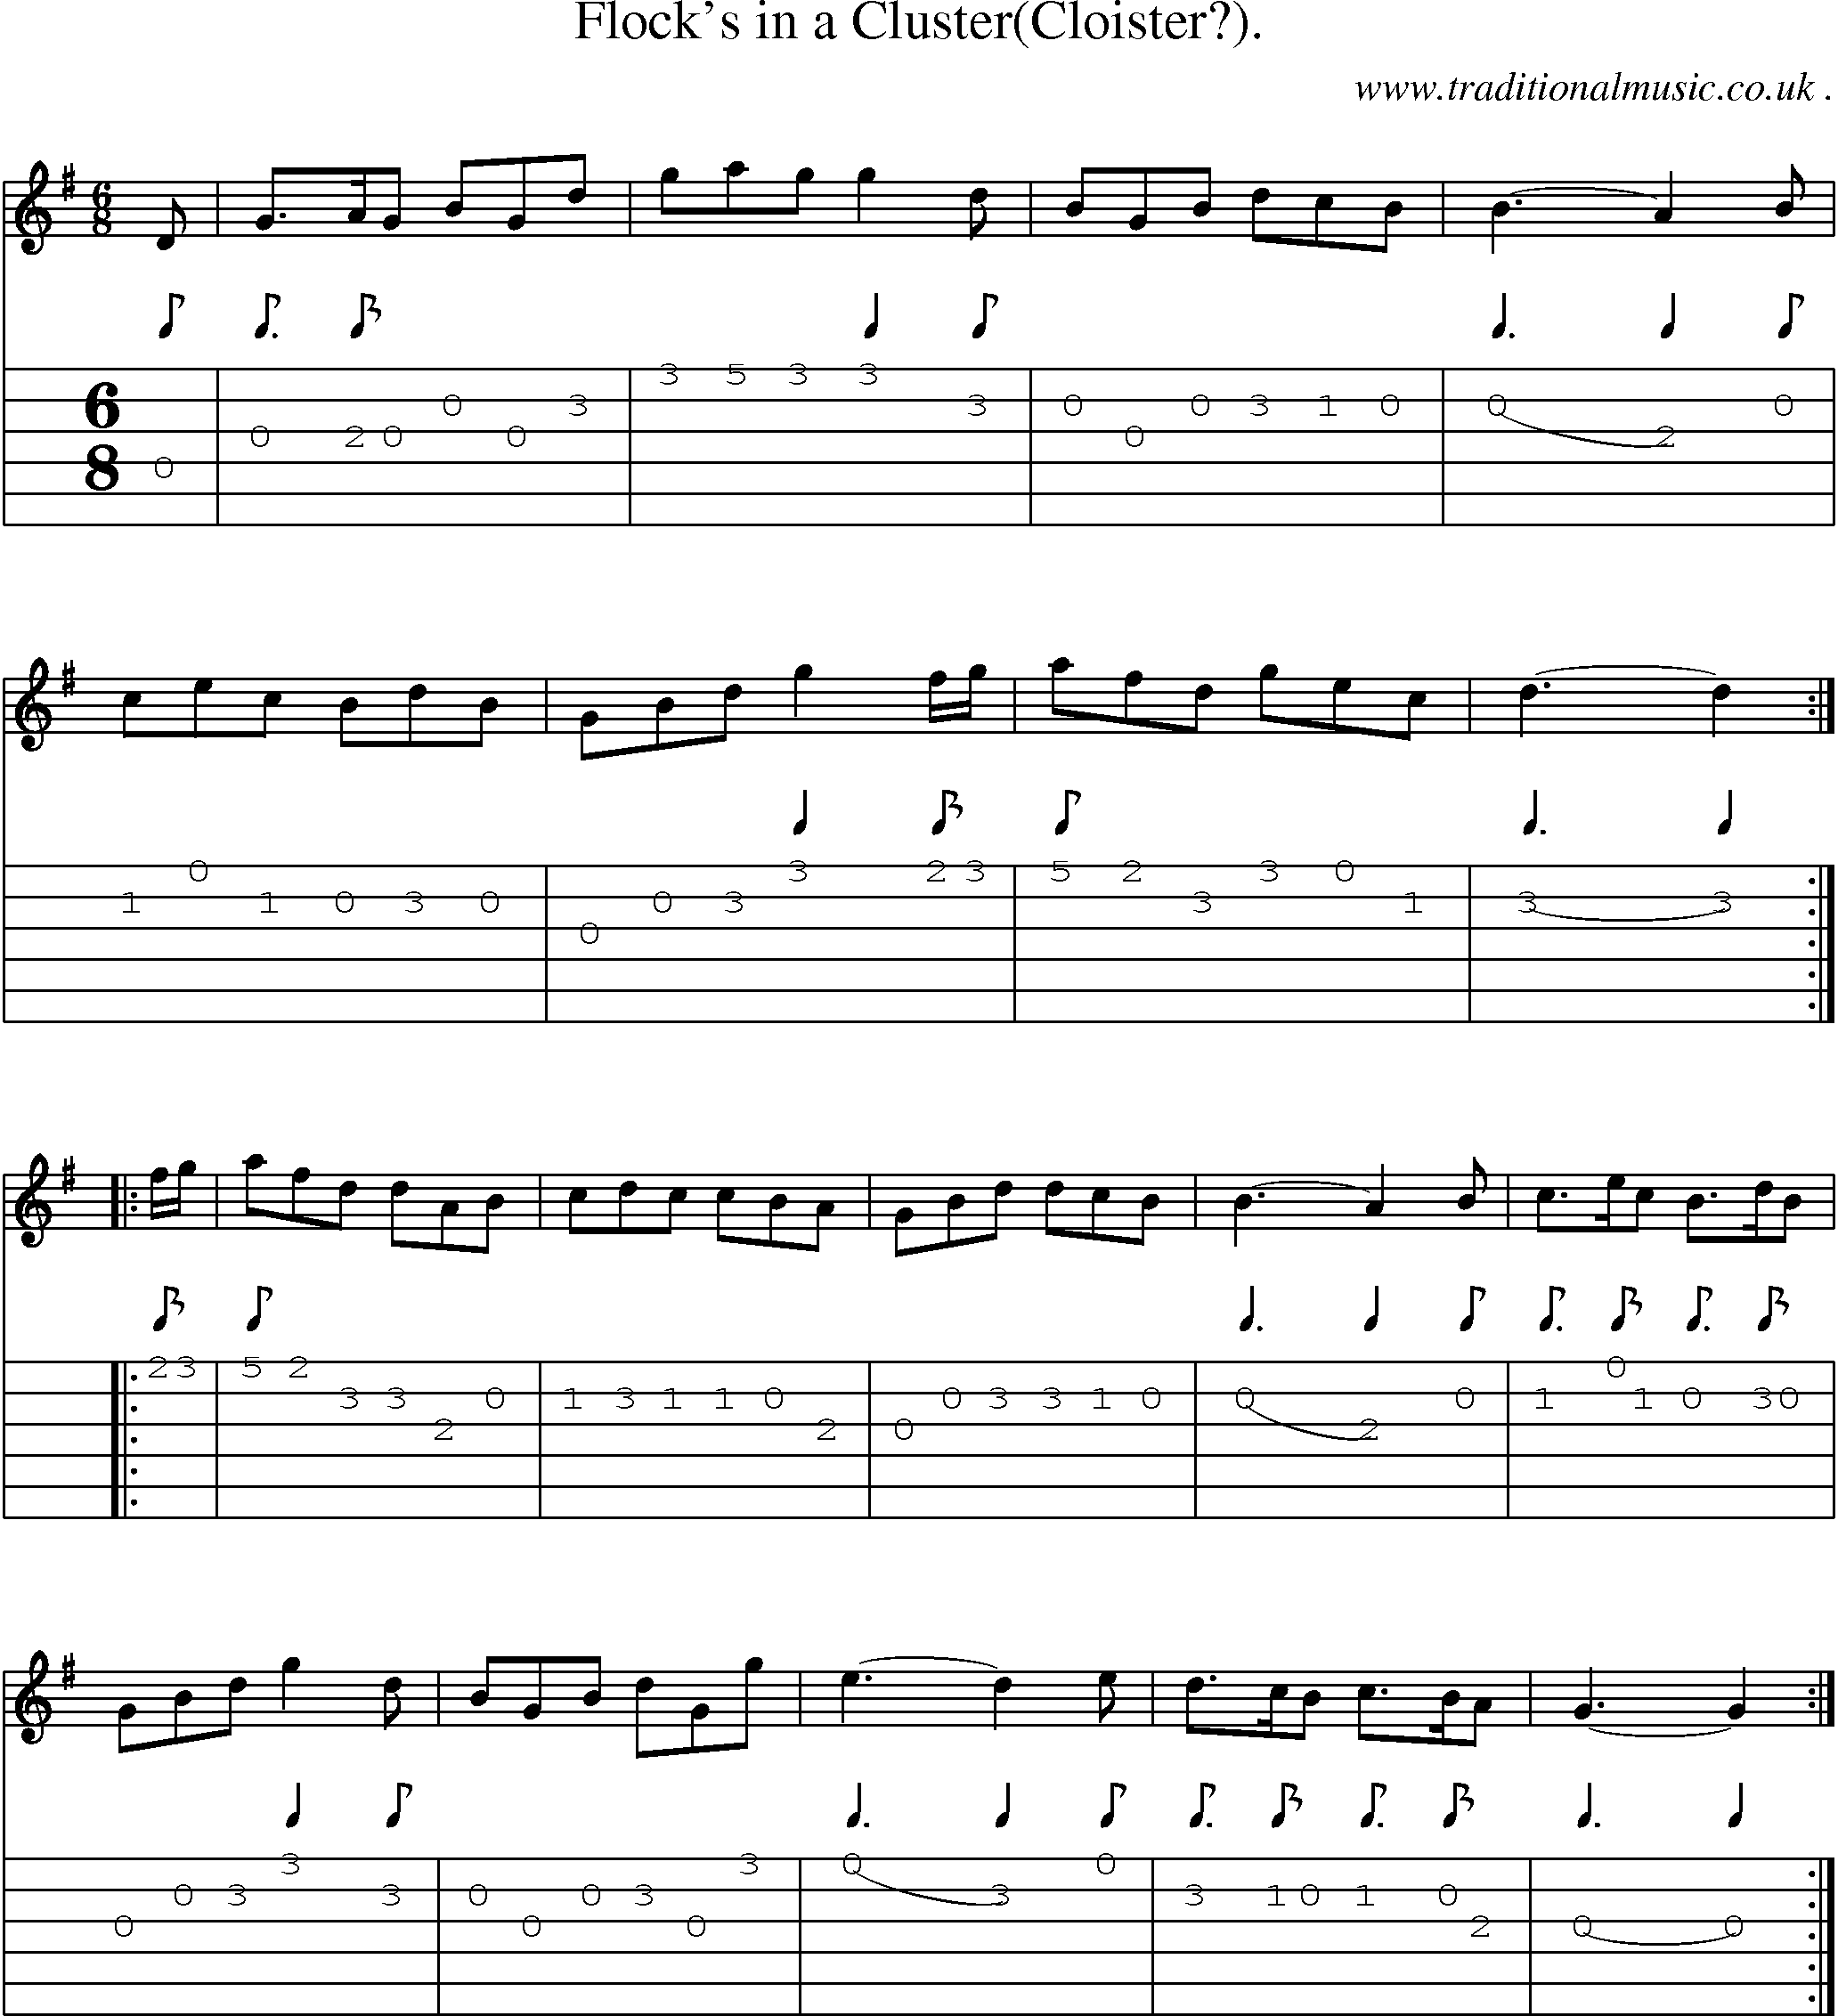 Sheet-Music and Guitar Tabs for Flocks In A Cluster(cloister)